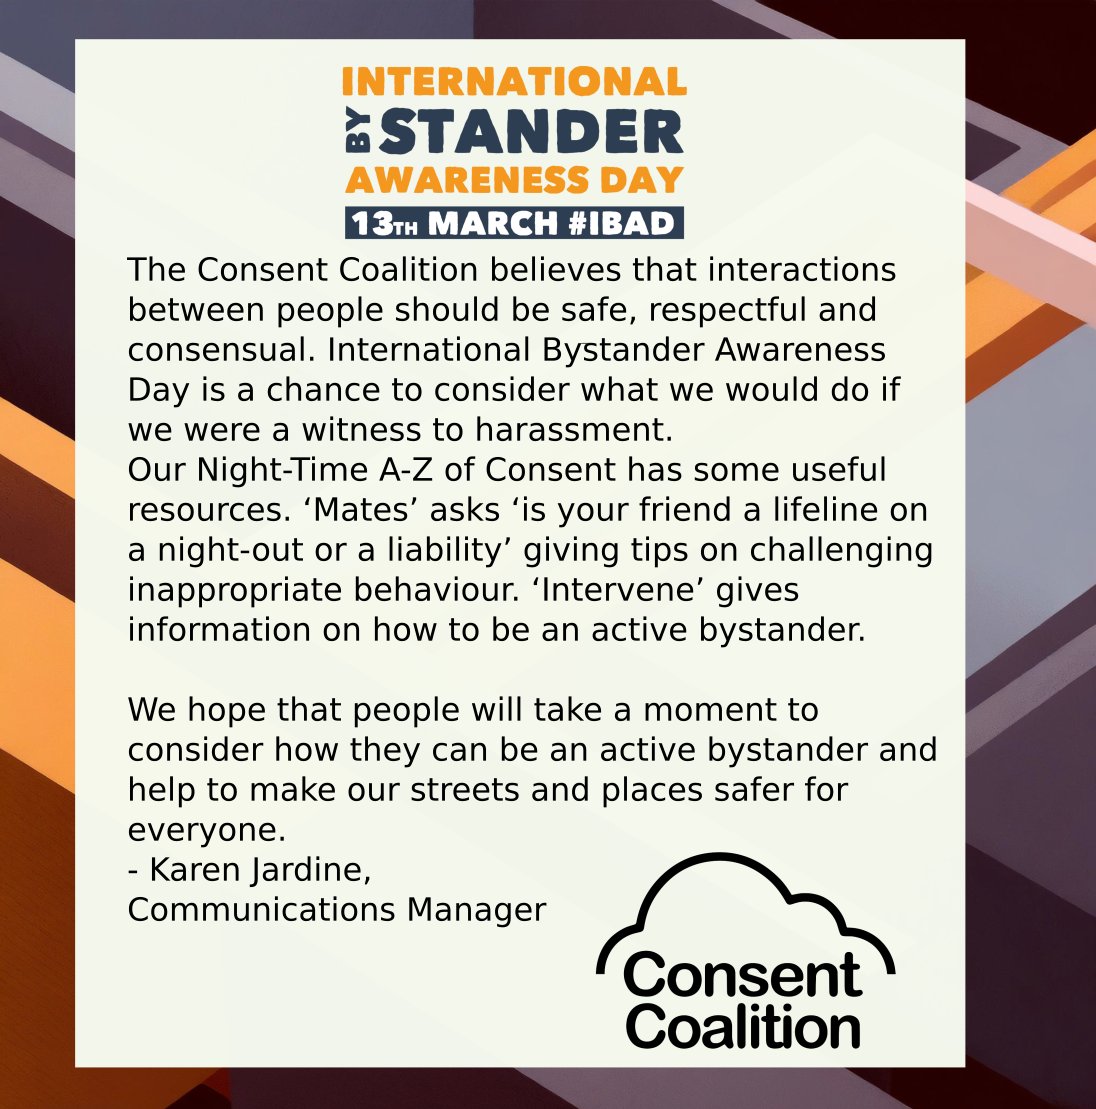 Ahead of #IBAD tomorrow, @ConsentInNotts encourages people to safely intervene when they witness harassment to help make our streets and public spaces safer for everyone ⬇️